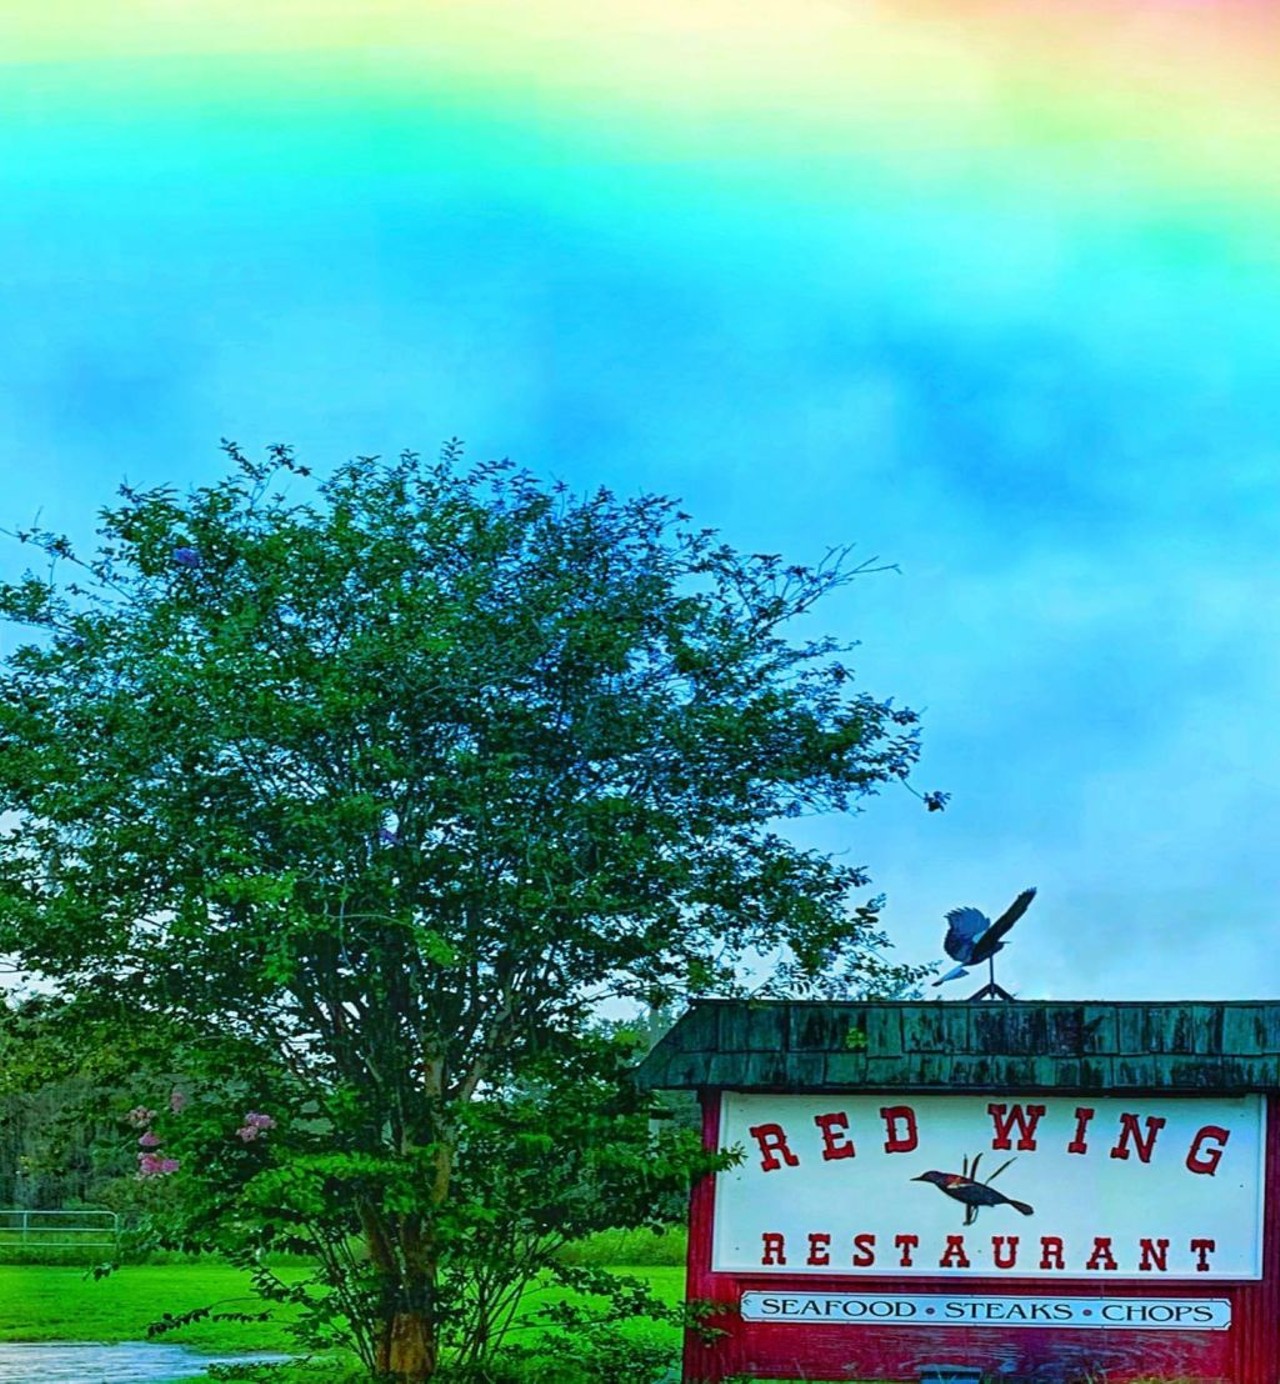 Red Wing Restaurant 
12500 FL-33, Groveland, FL 34736, (352) 429-2997
Red Wing has been open since the 1940s and they offer a variety of hand cut steaks, fresh fish and meat.
Photo via Red Wing Restaurant/Facebook